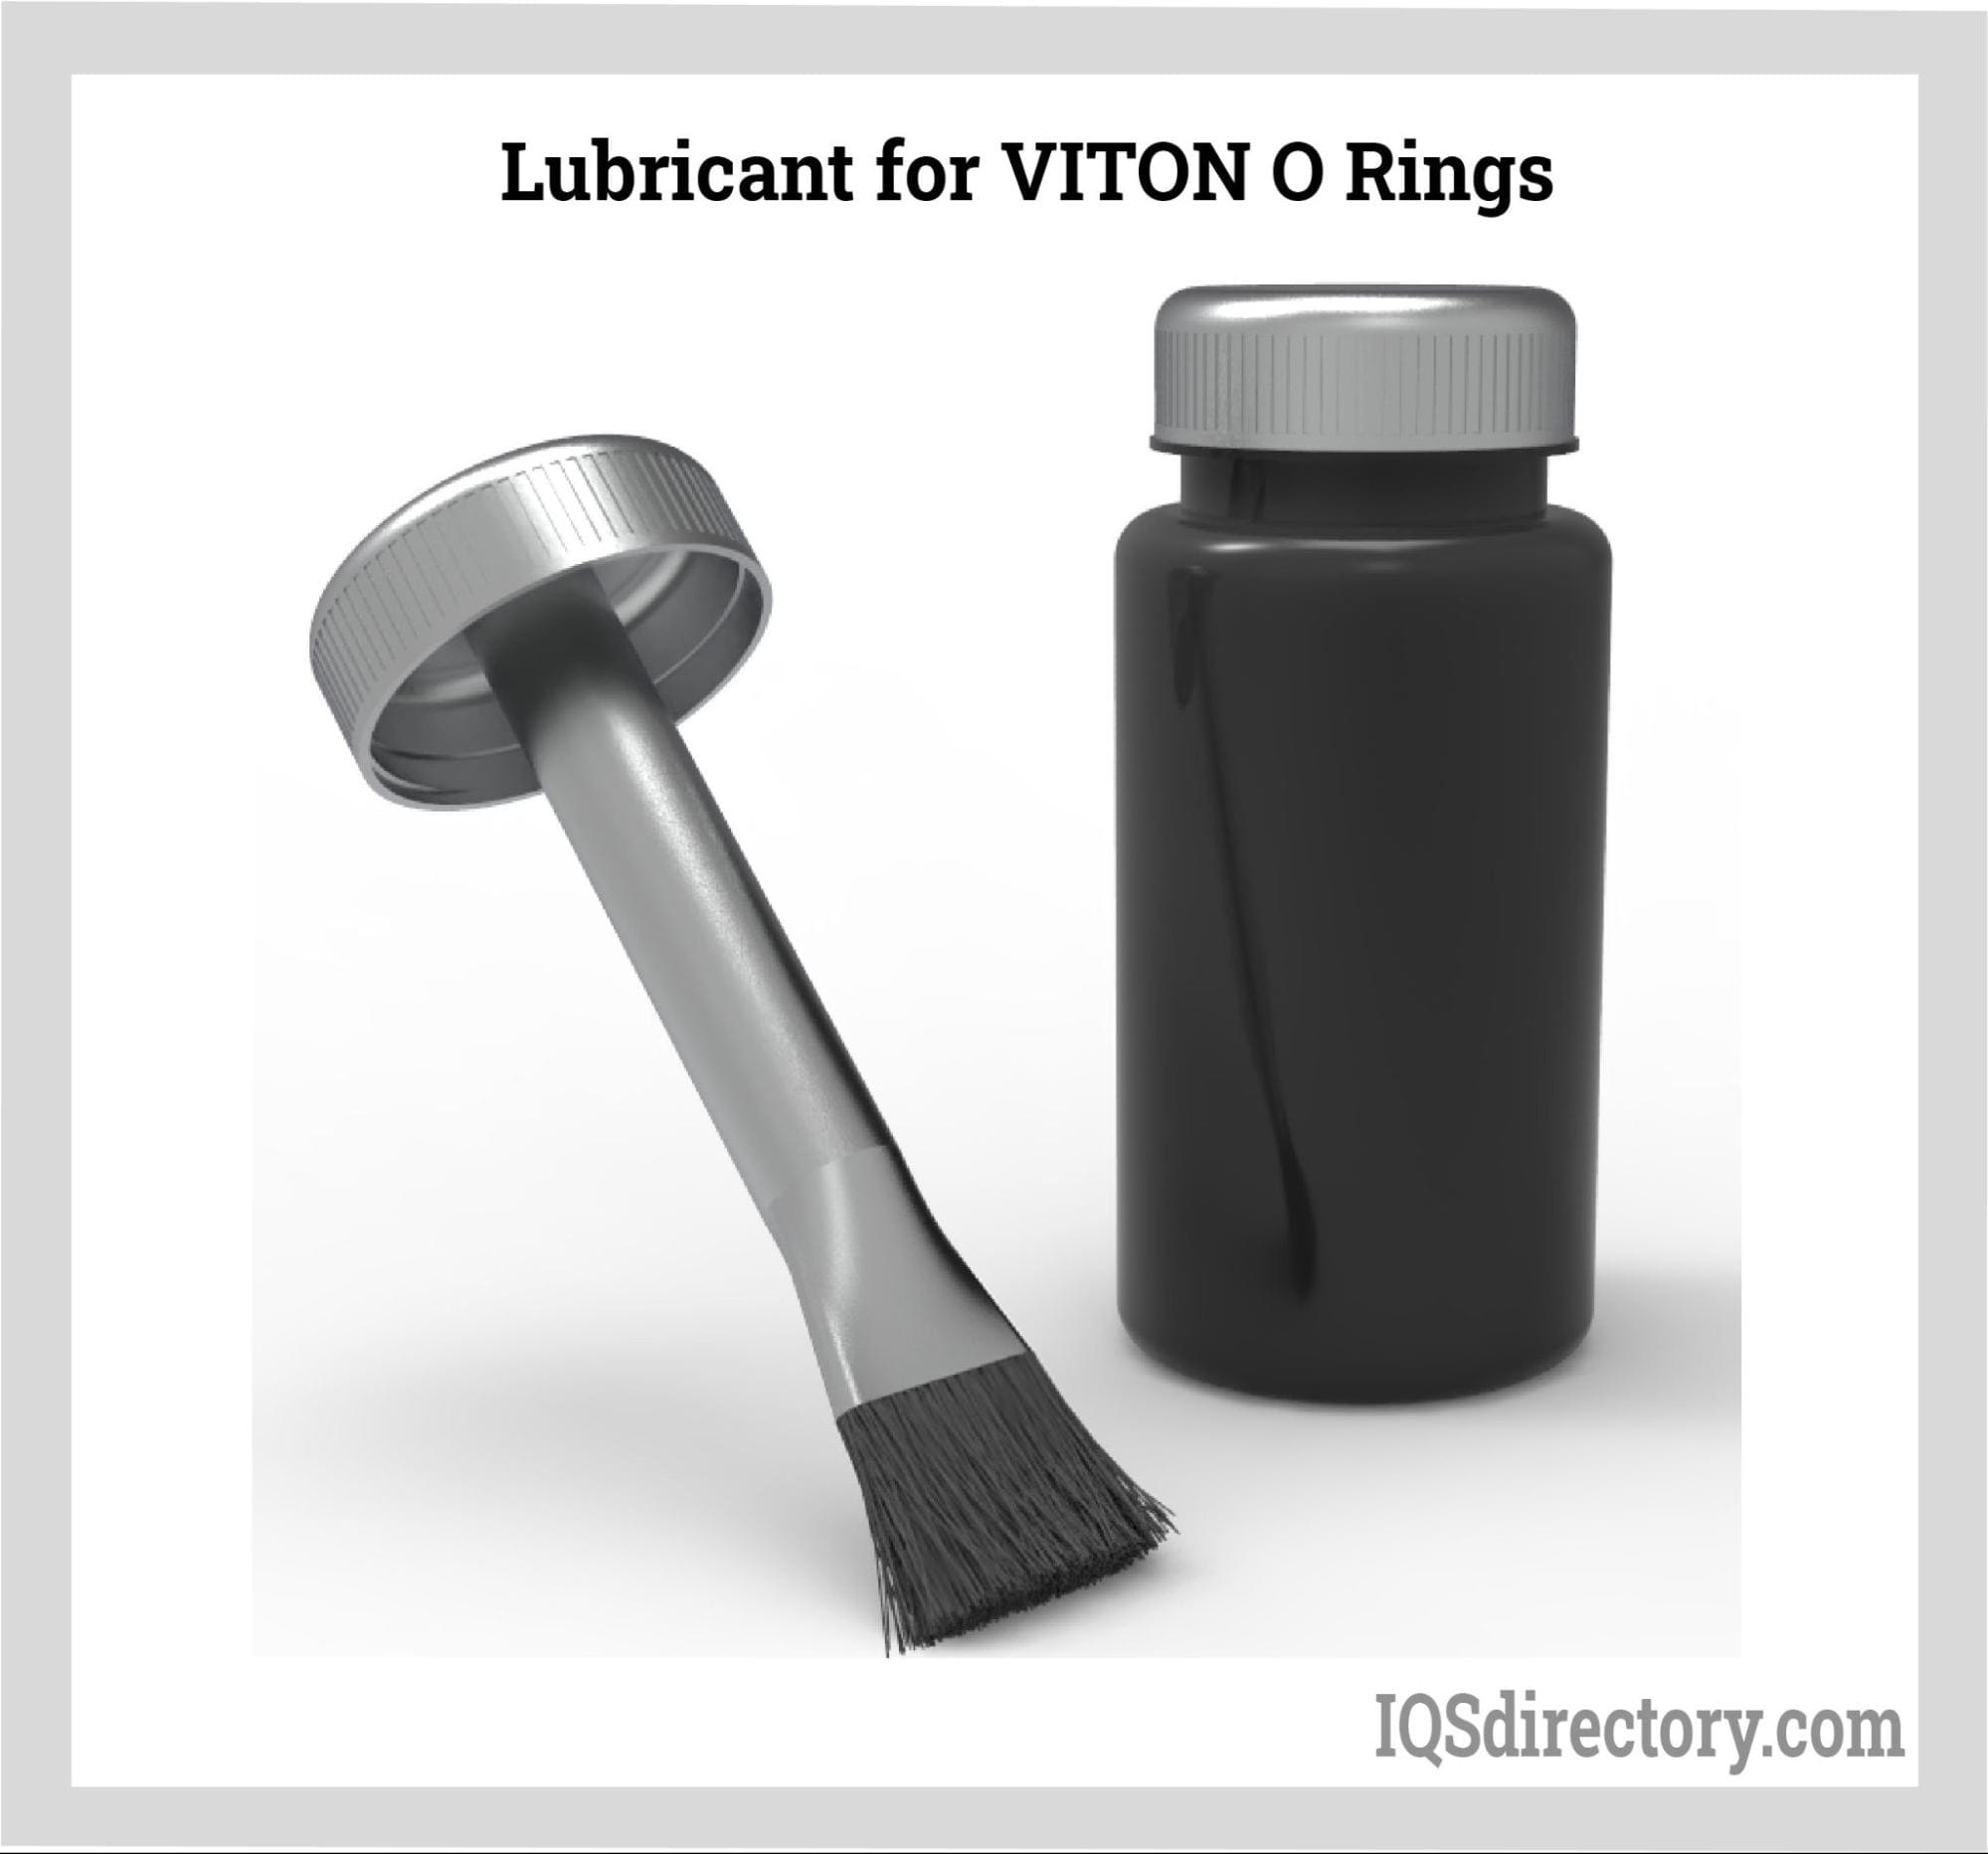 Lubricant for Viton O-Rings